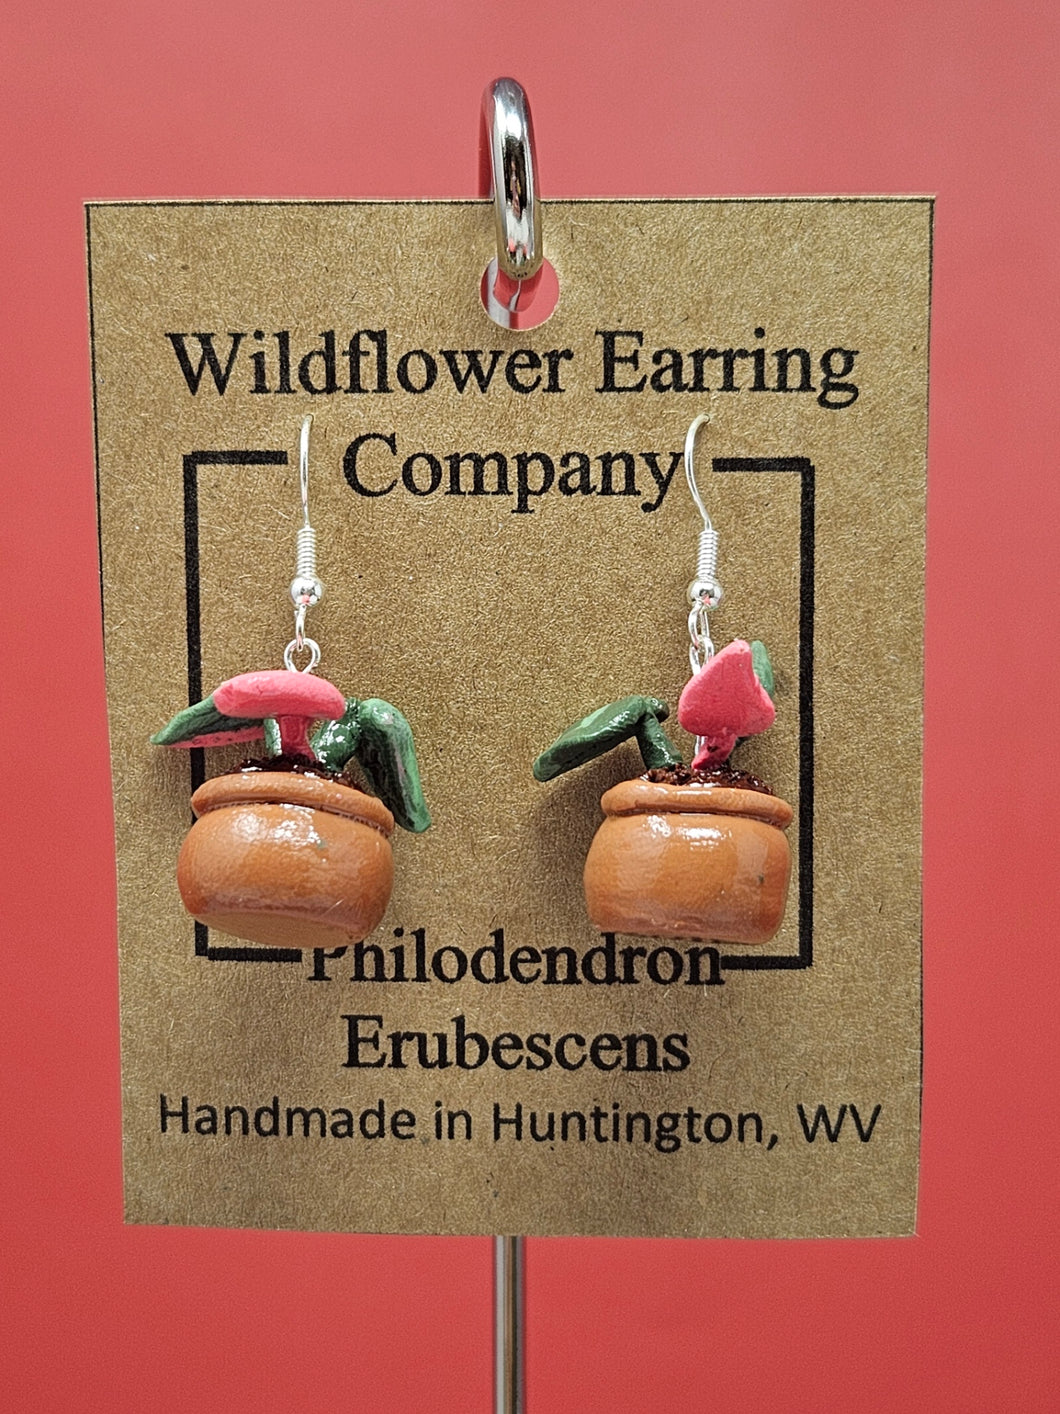 Philodendron Erubescens Polymer Clay Earrings